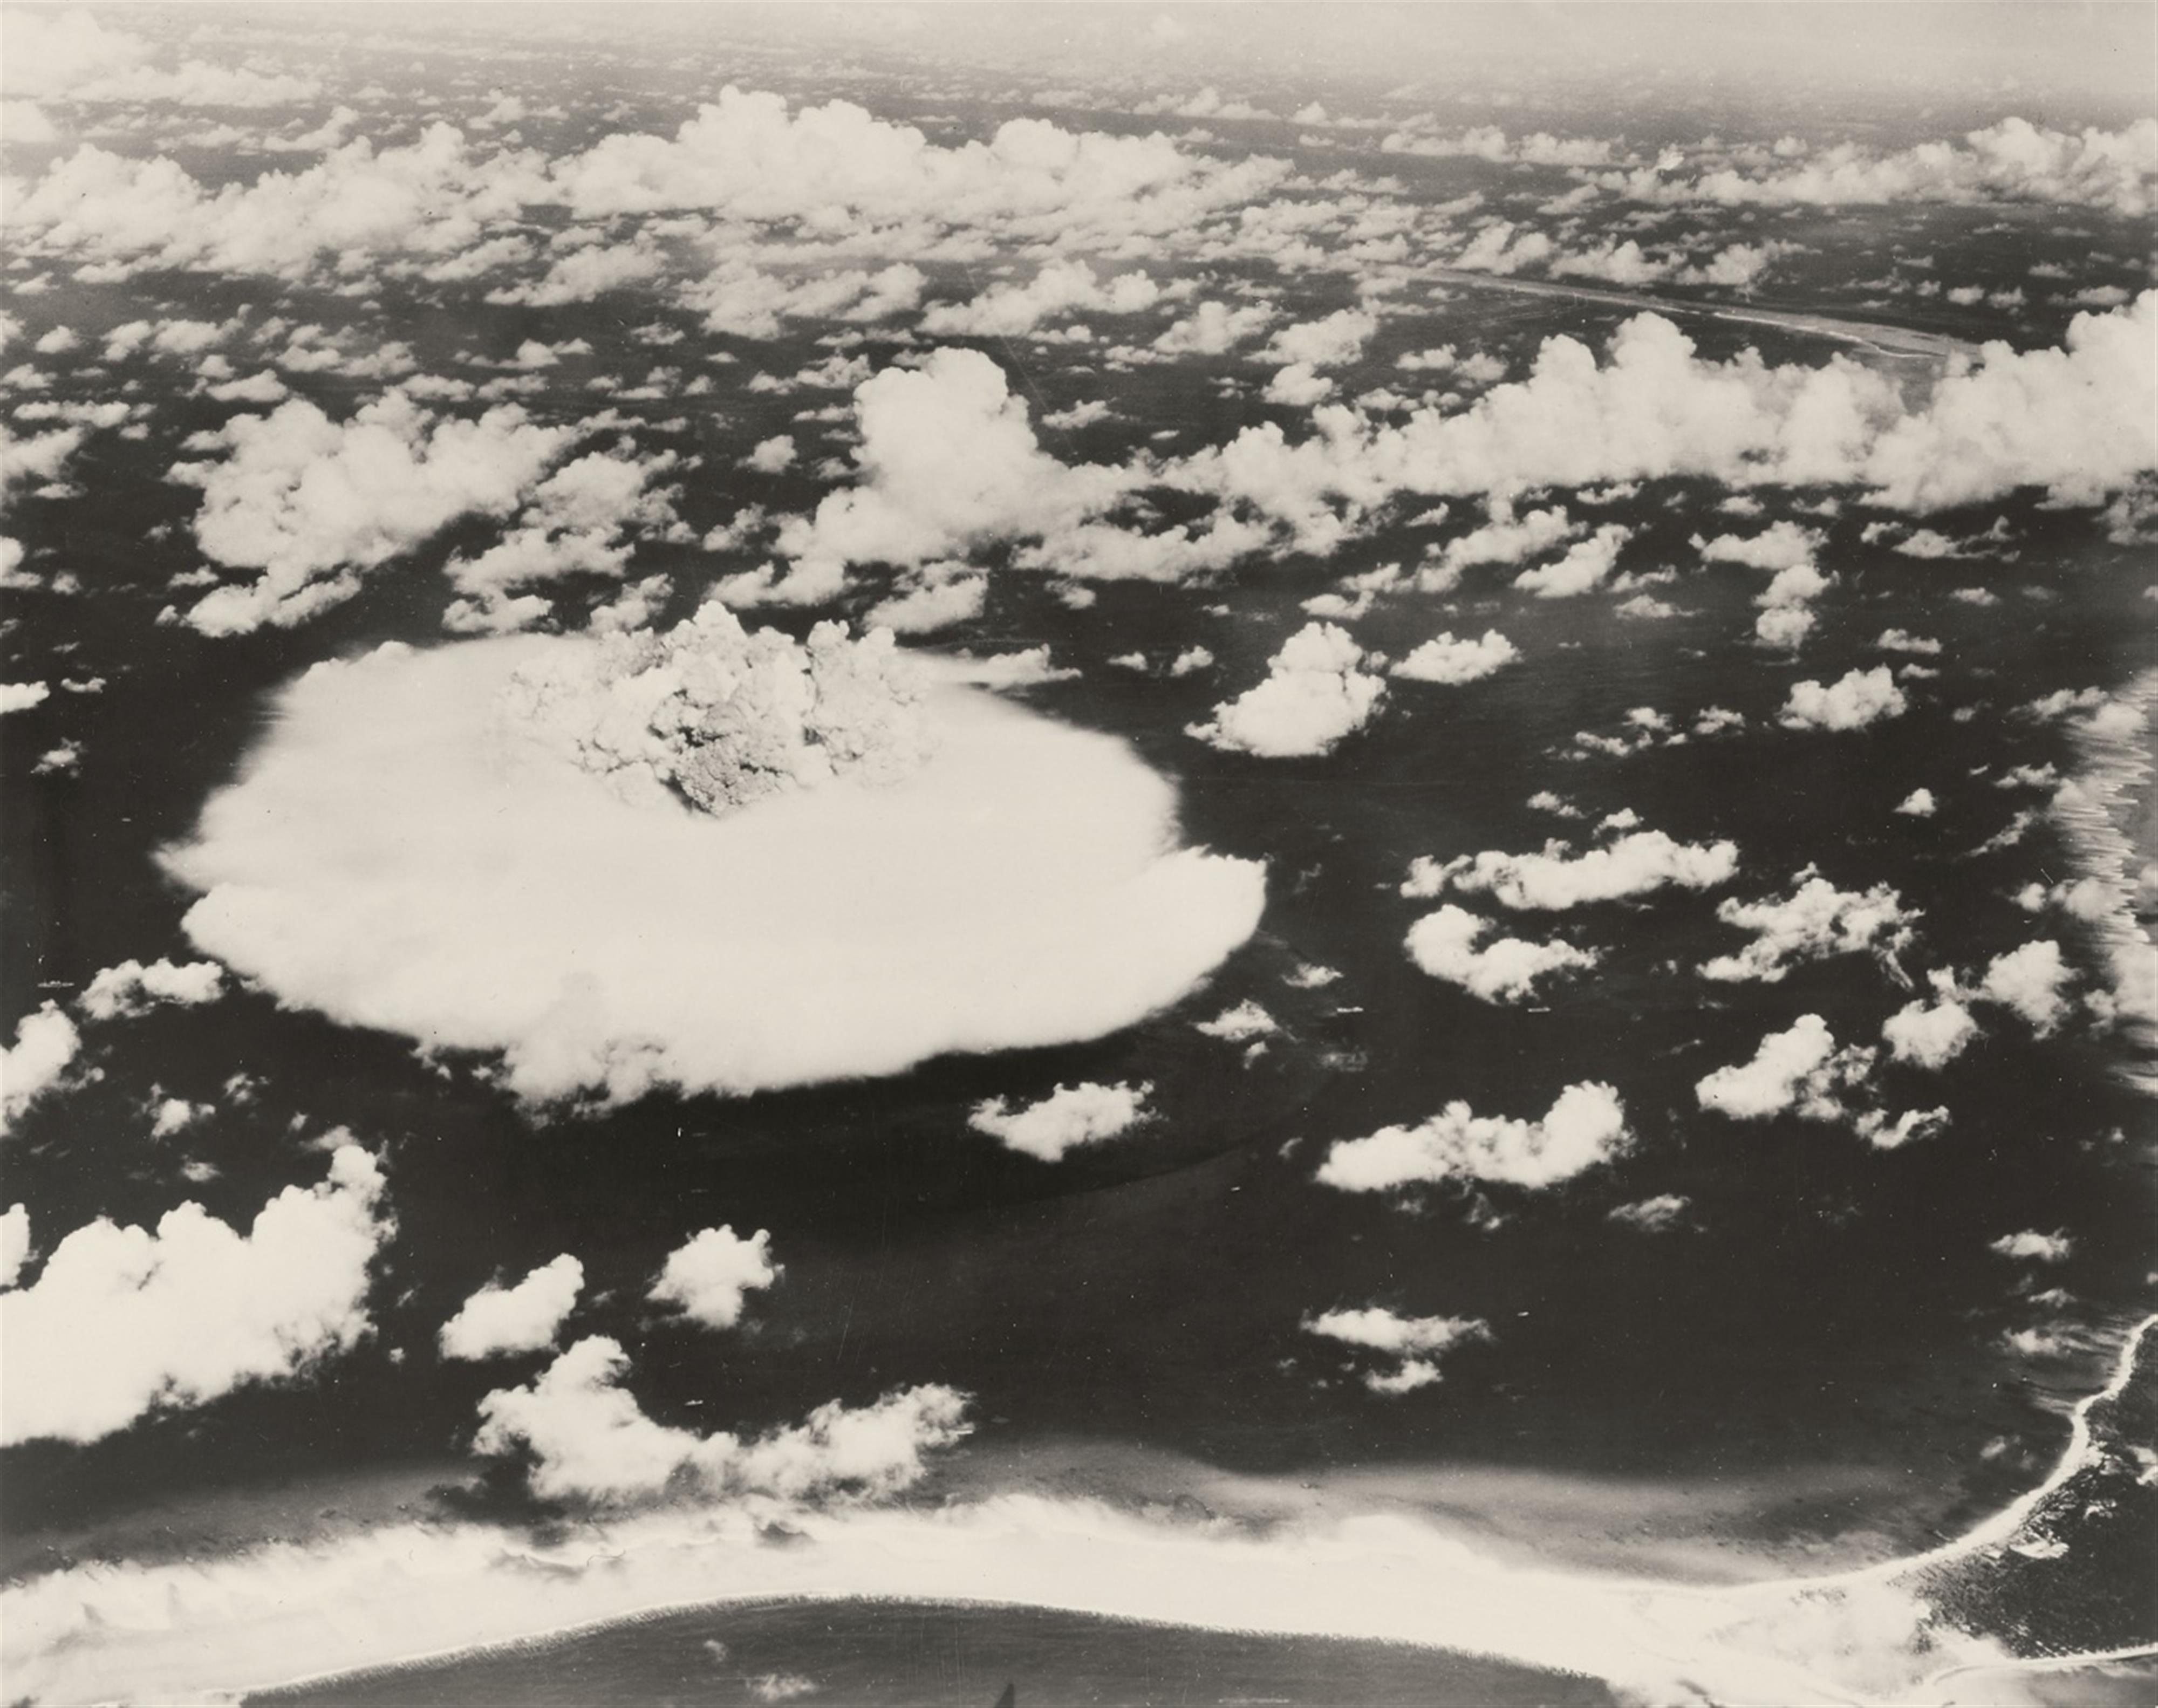 Joint Army Task Force One Photo - "Operation Crossroads" - Views of the Bikini Atoll nuclear Tests - image-20